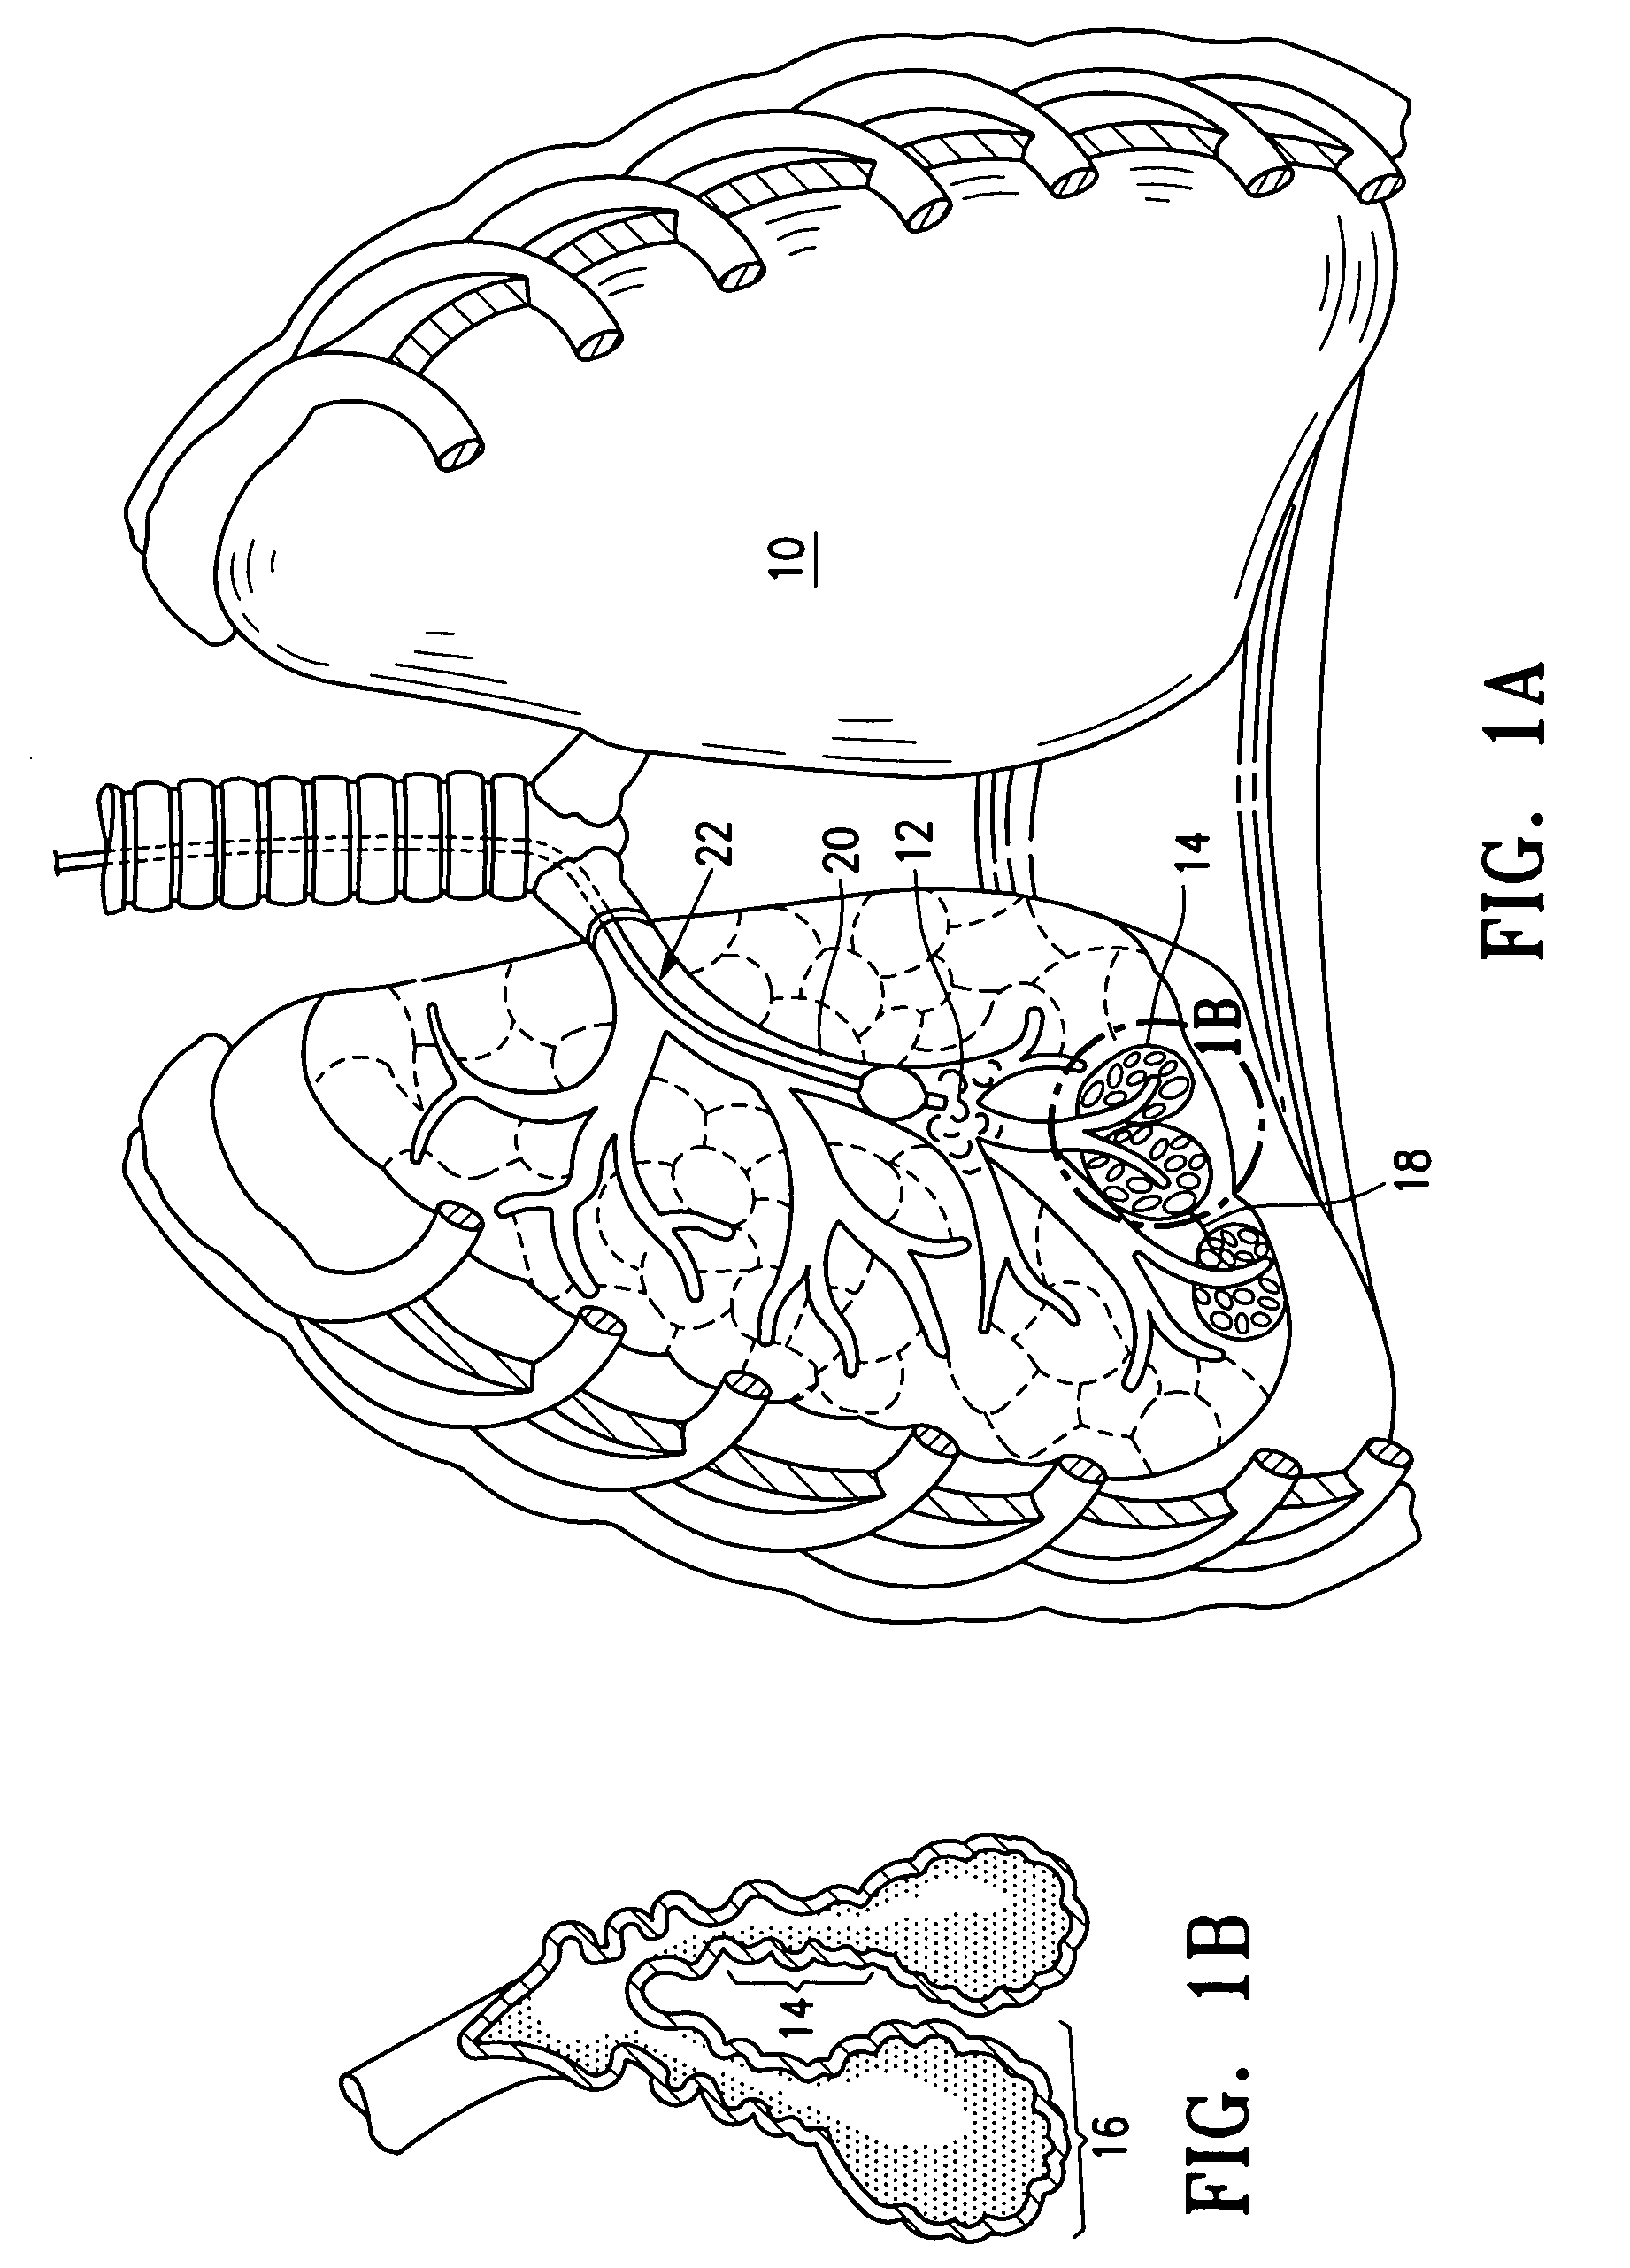 Device and method for lung treatment